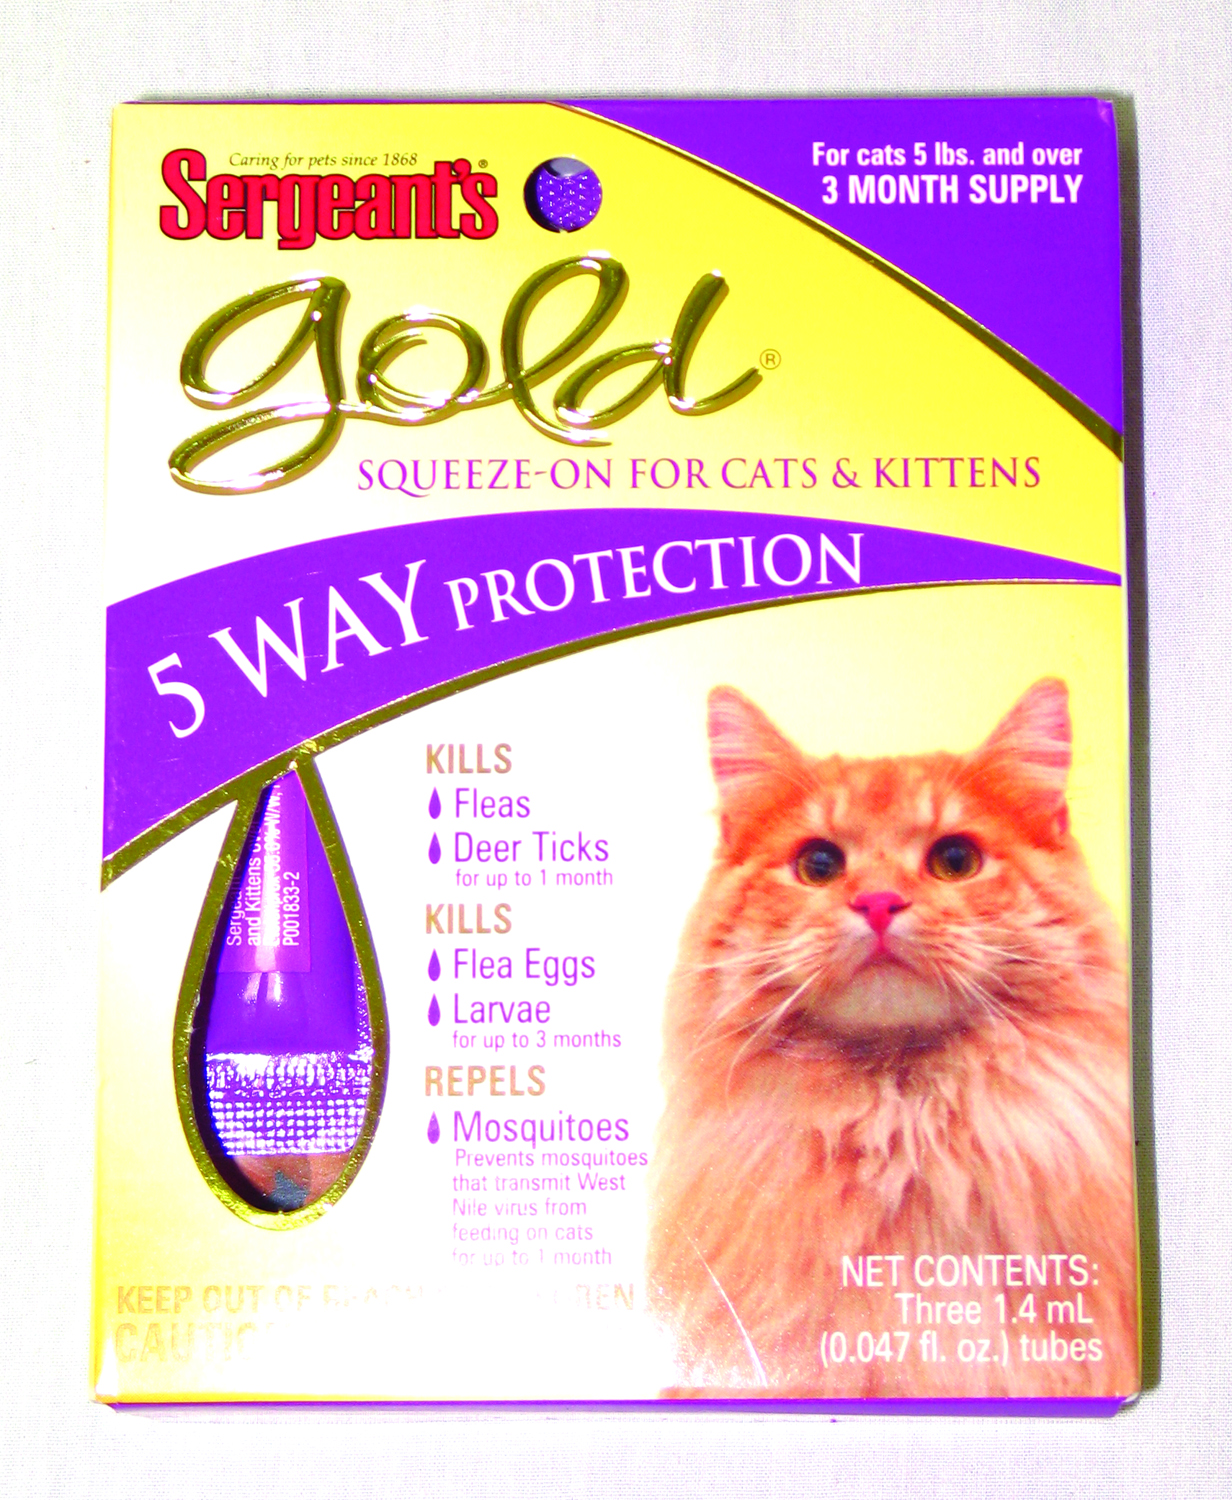 GOLD SQUEEZE-ON FOR CATS